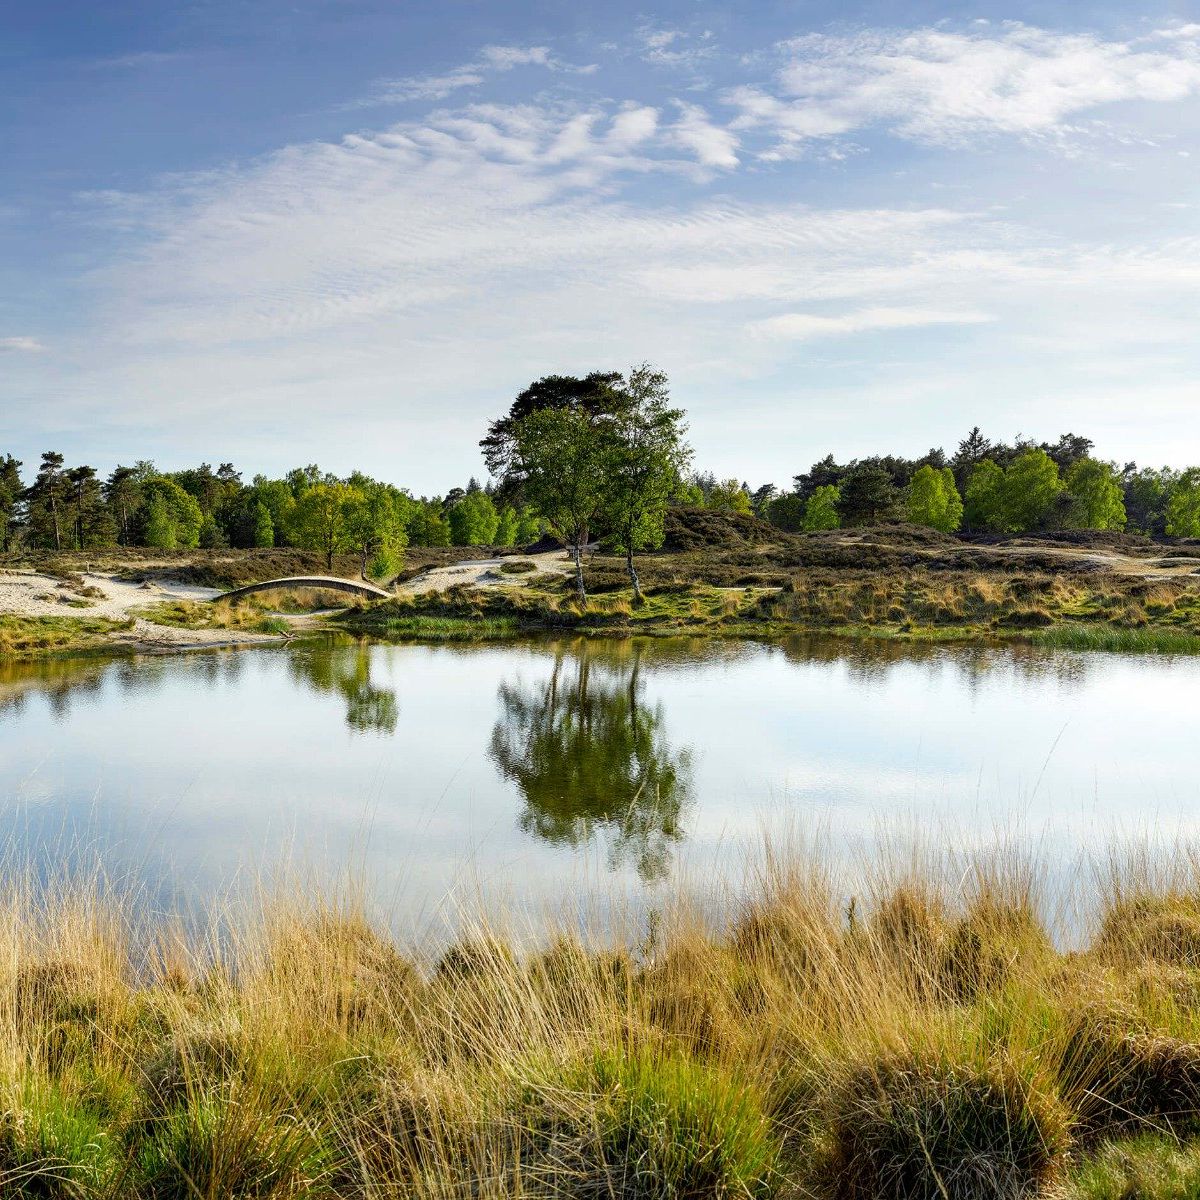 A small forest lake in the heathland area